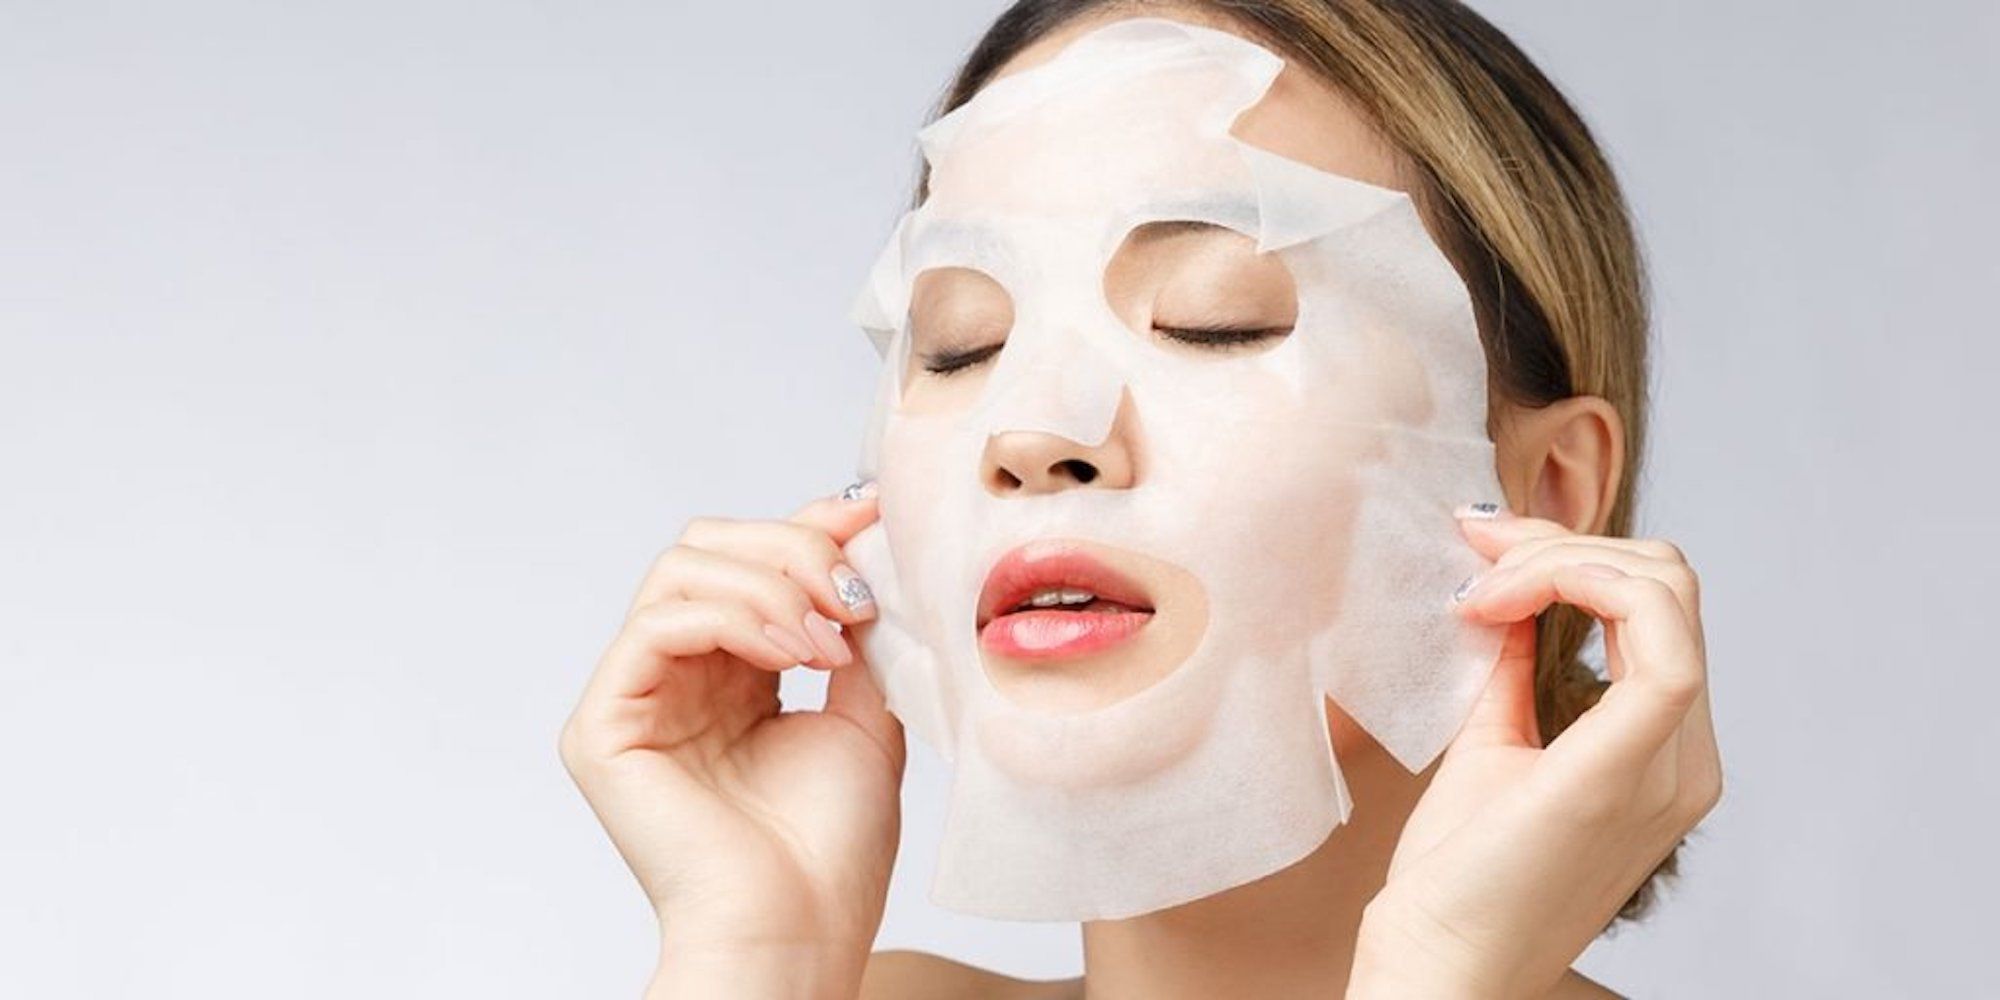 Using Peel-Off Masks Can Cause Severe Damage to Your Skin